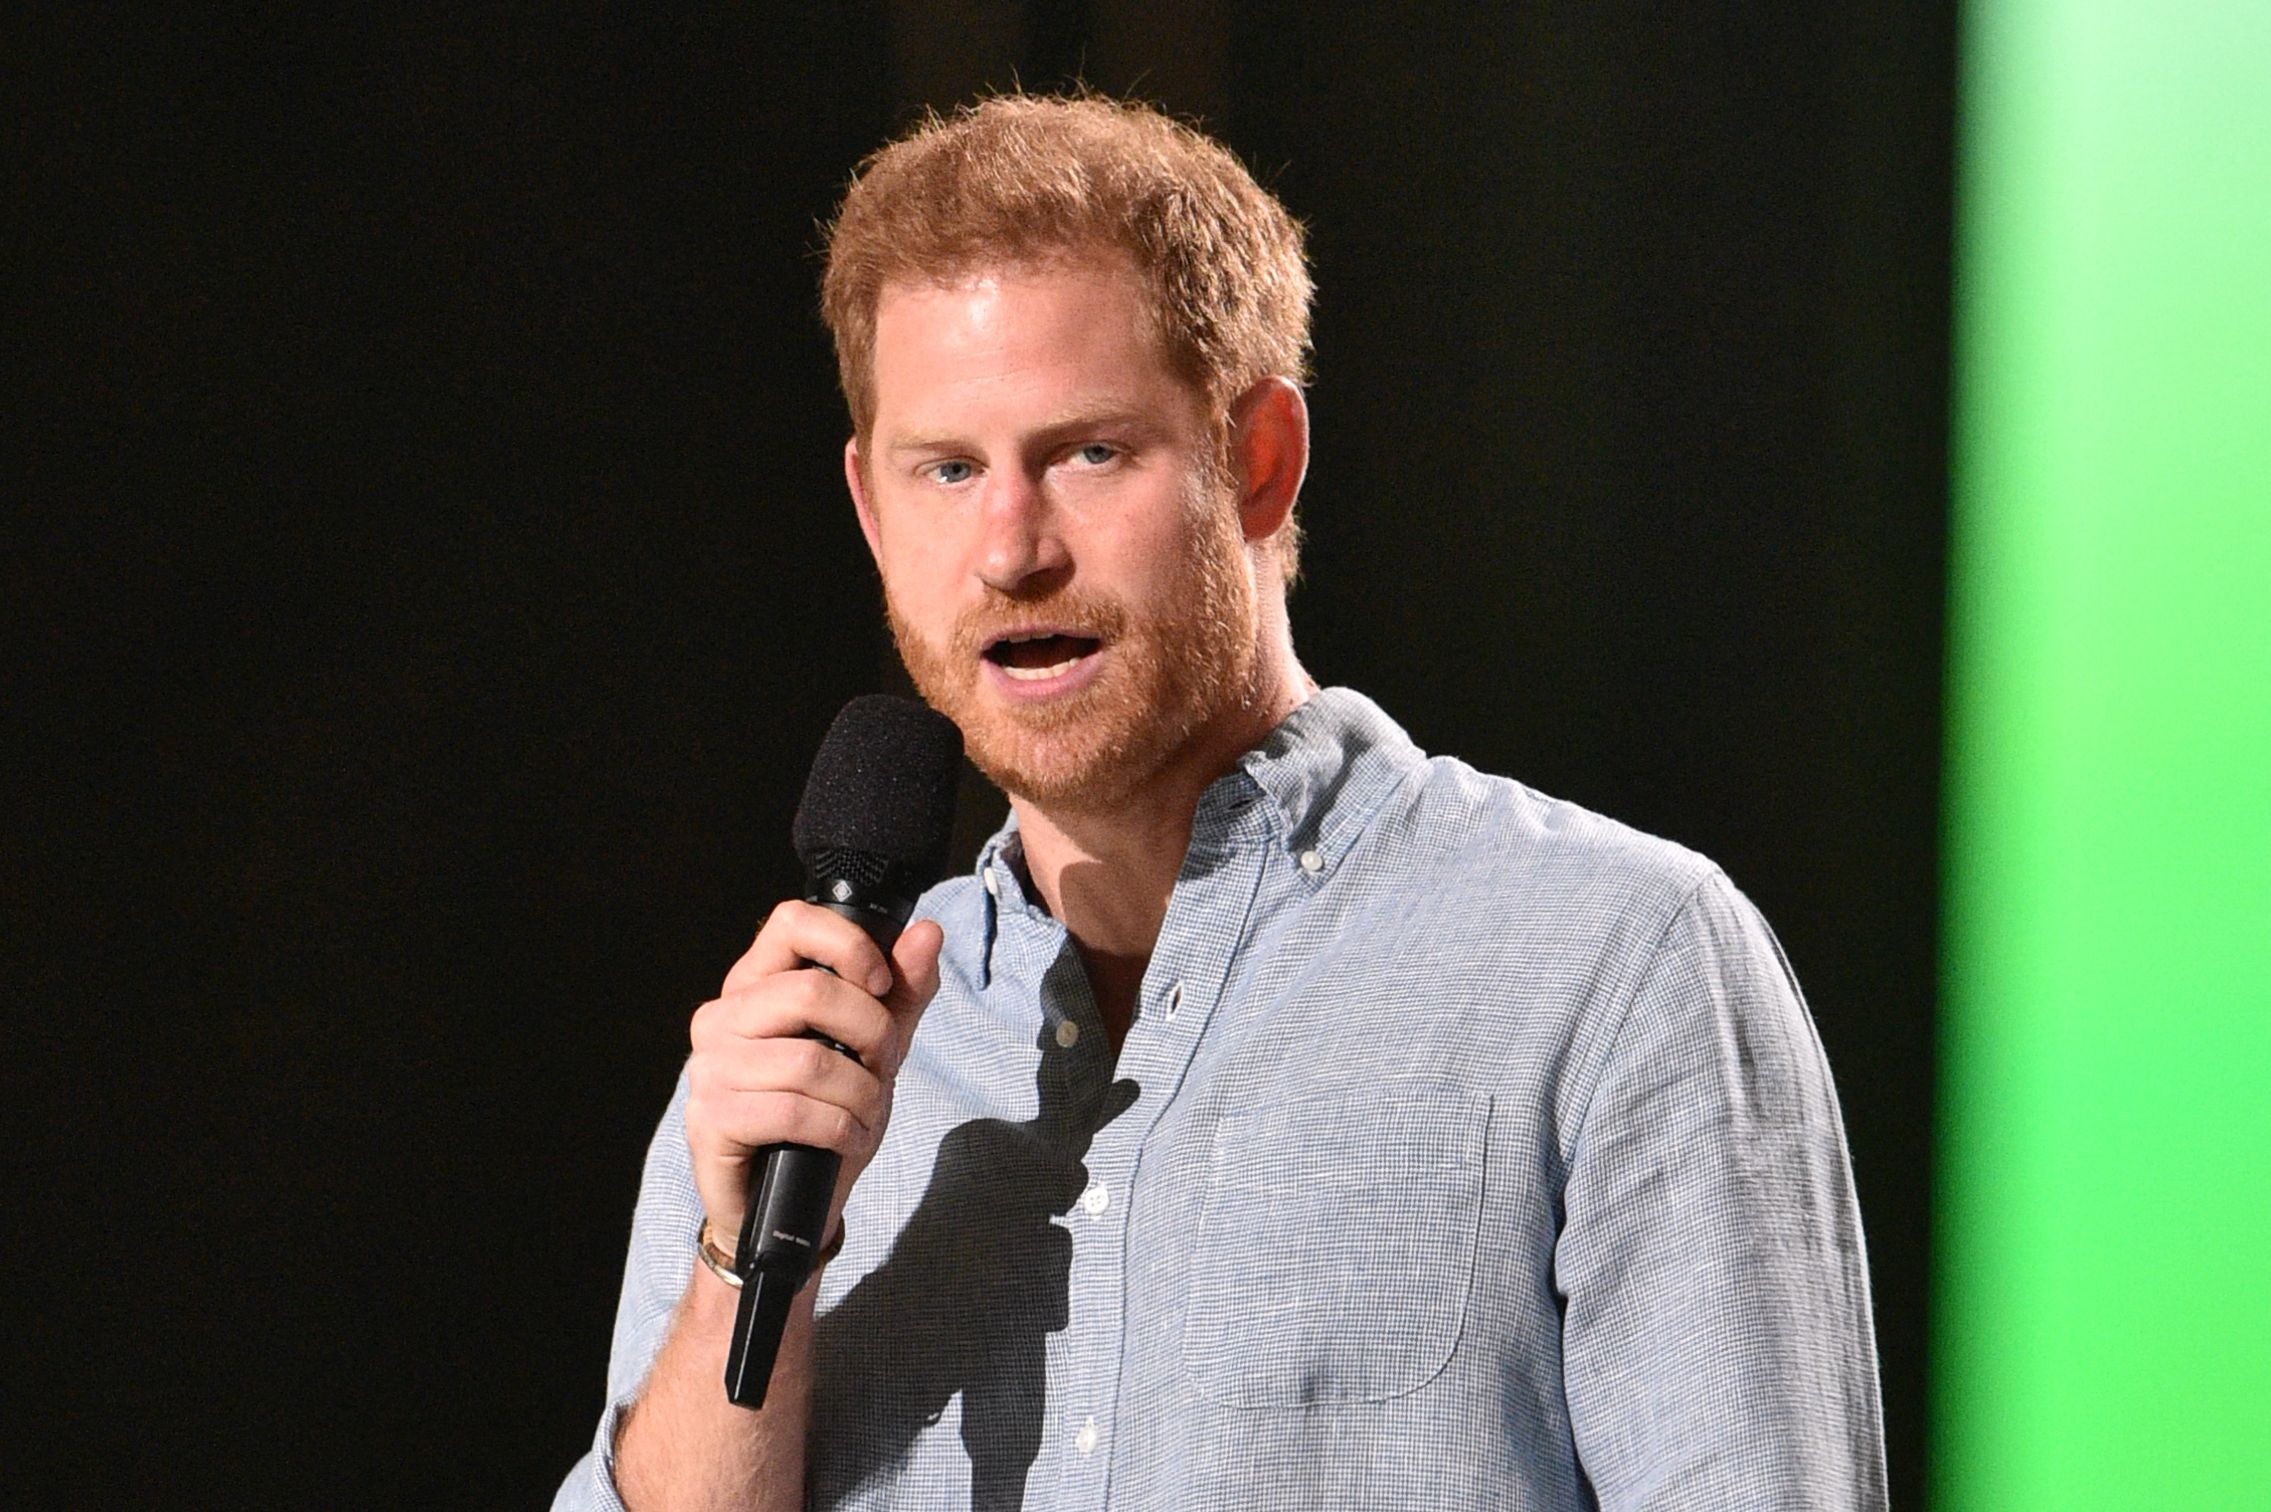 Prince Harry onstage during the taping of the "Vax Live" fundraising concert at SoFi Stadium in Inglewood, California, on May 2, 2021. | Getty Images